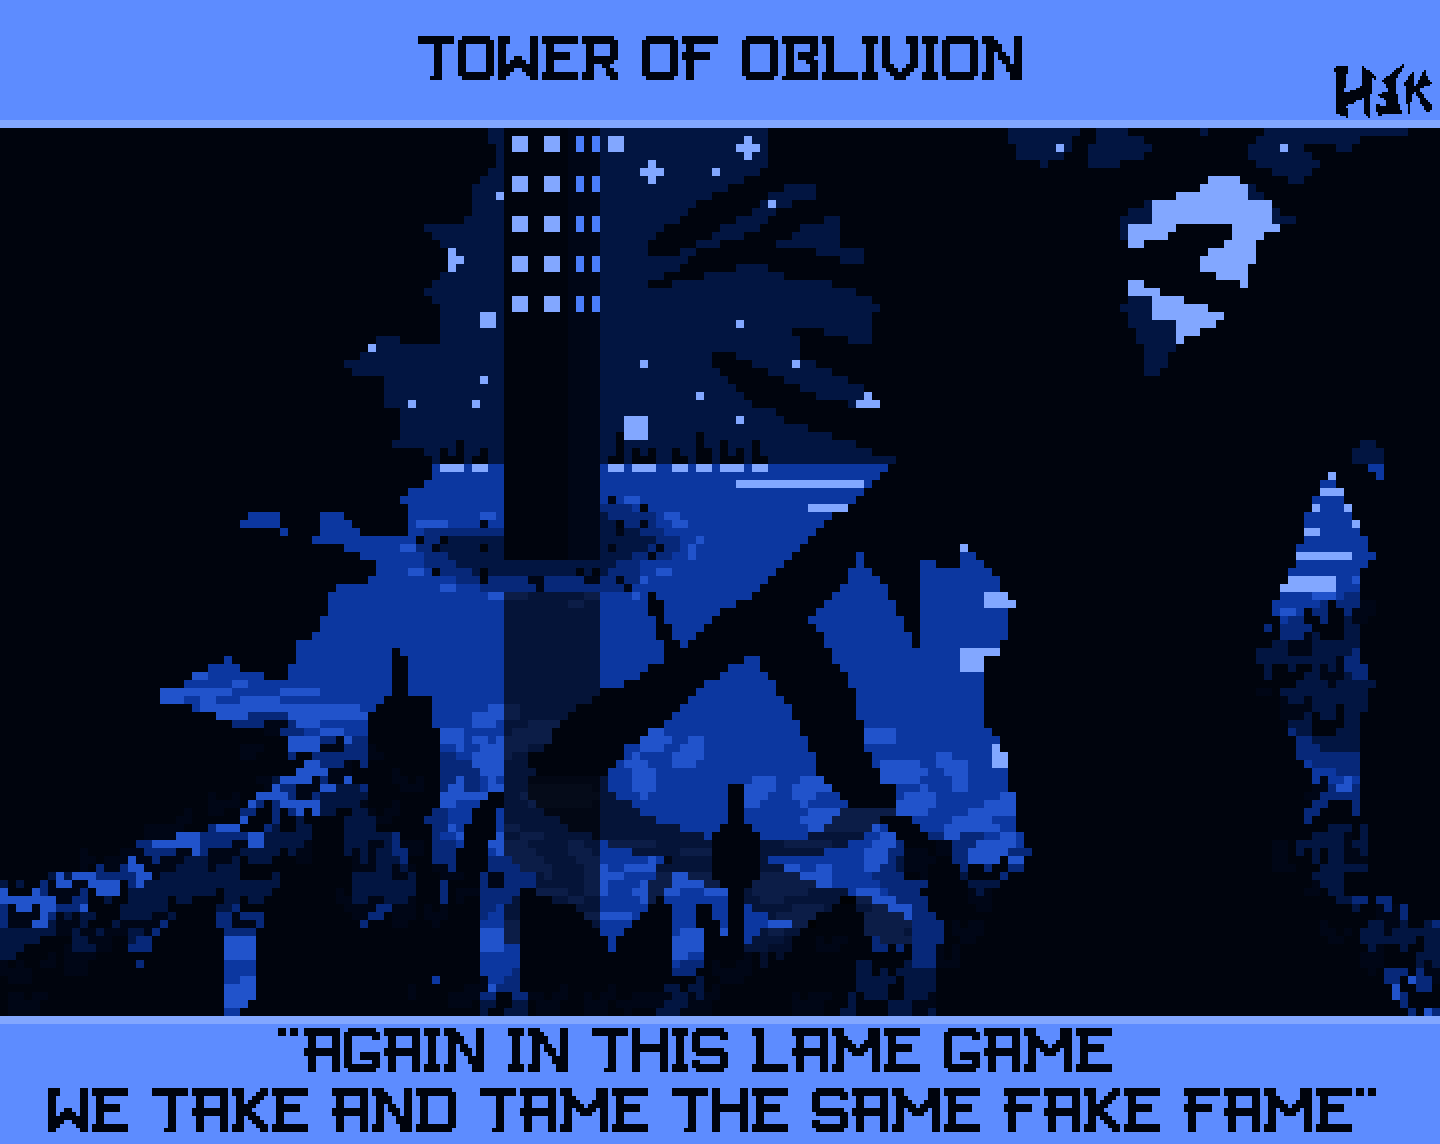 Day 7: Tower of Oblivion